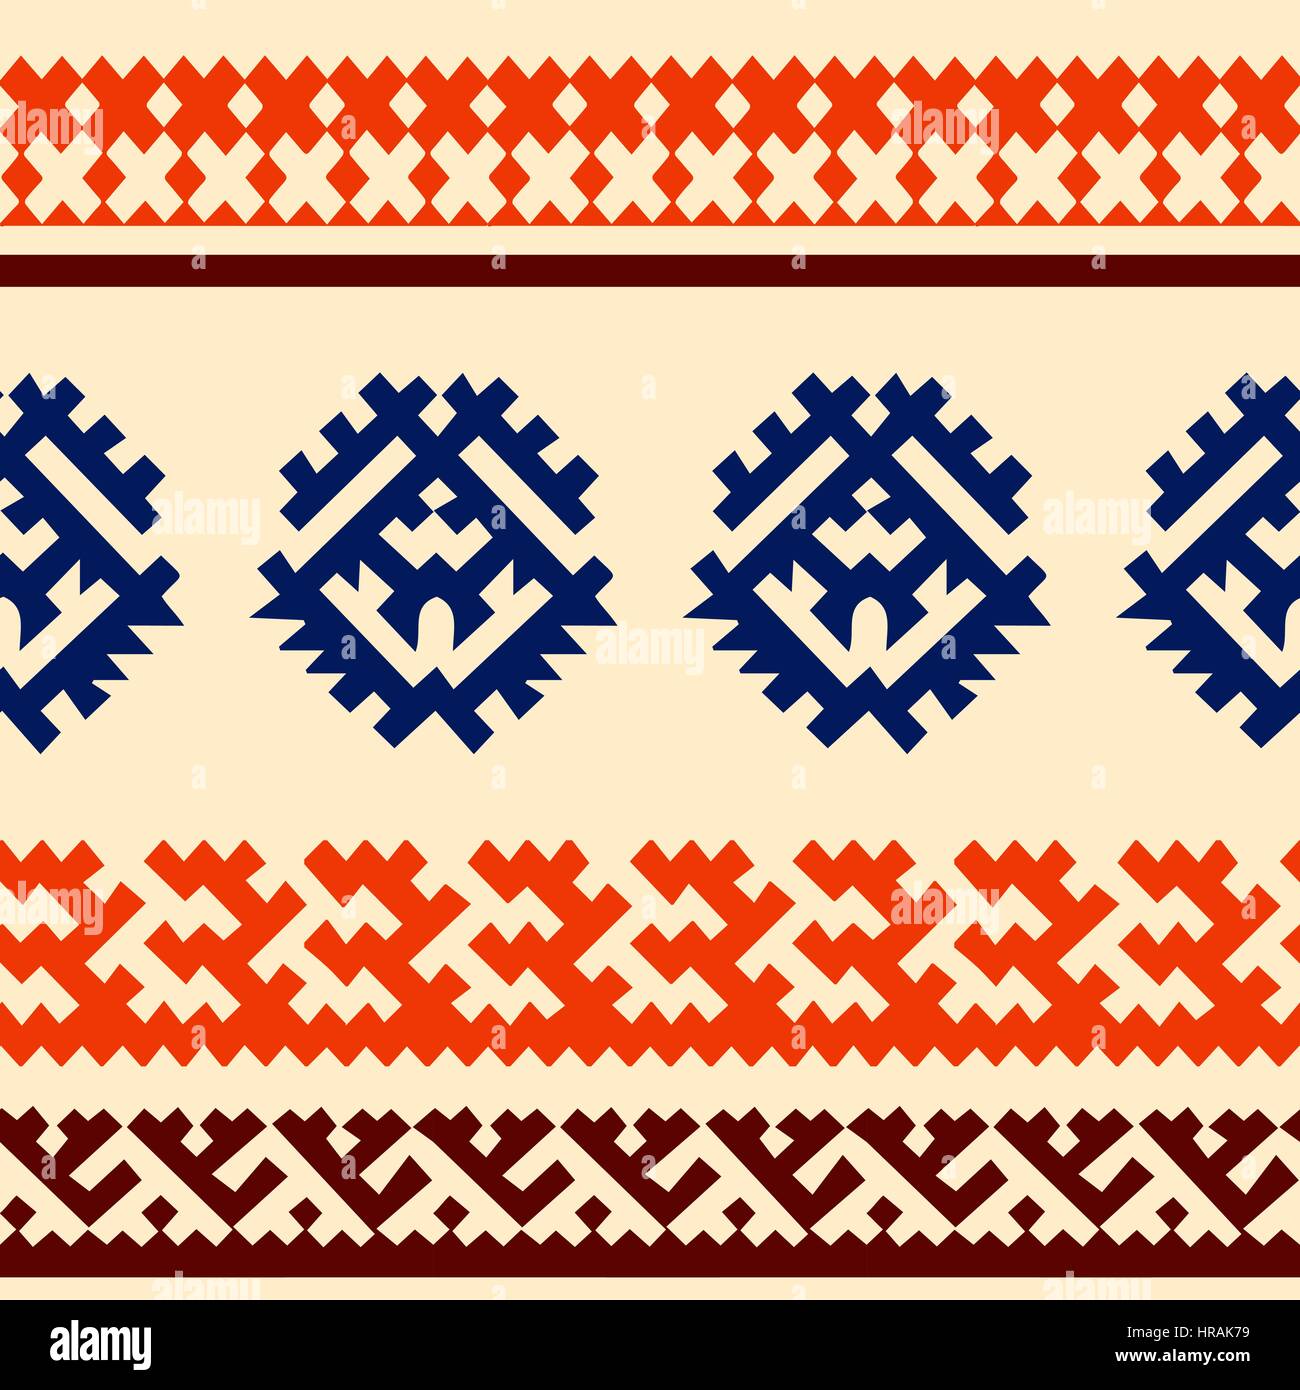 Tribal seamless pattern. Siberian folk geometric print with ornamental motifs of khanty people in their authentic colors blue, orange and brown on a e Stock Vector